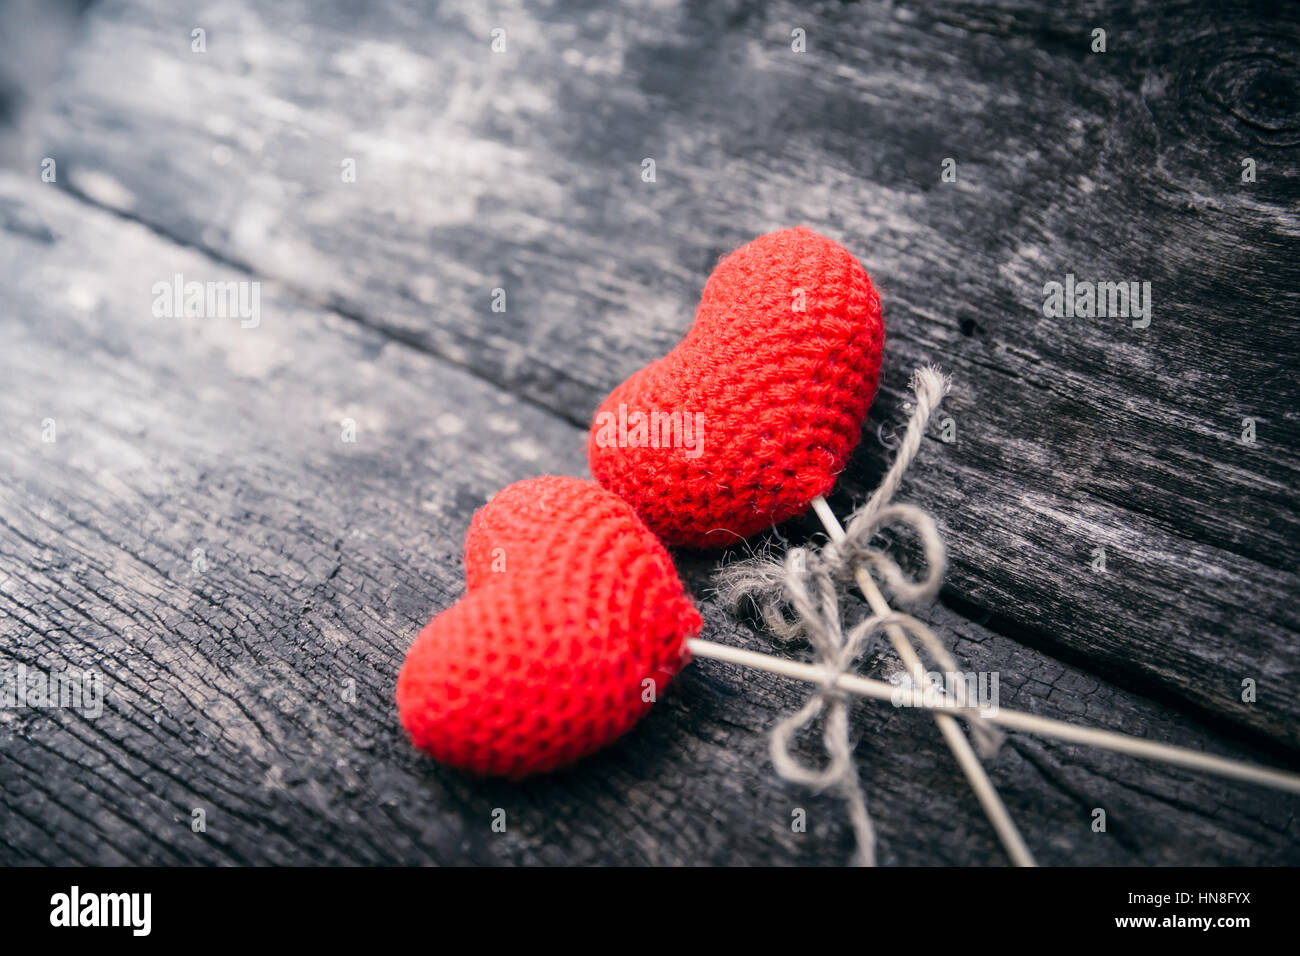 Sweet two red heart lover for Valentine's day love art background. Stock Photo